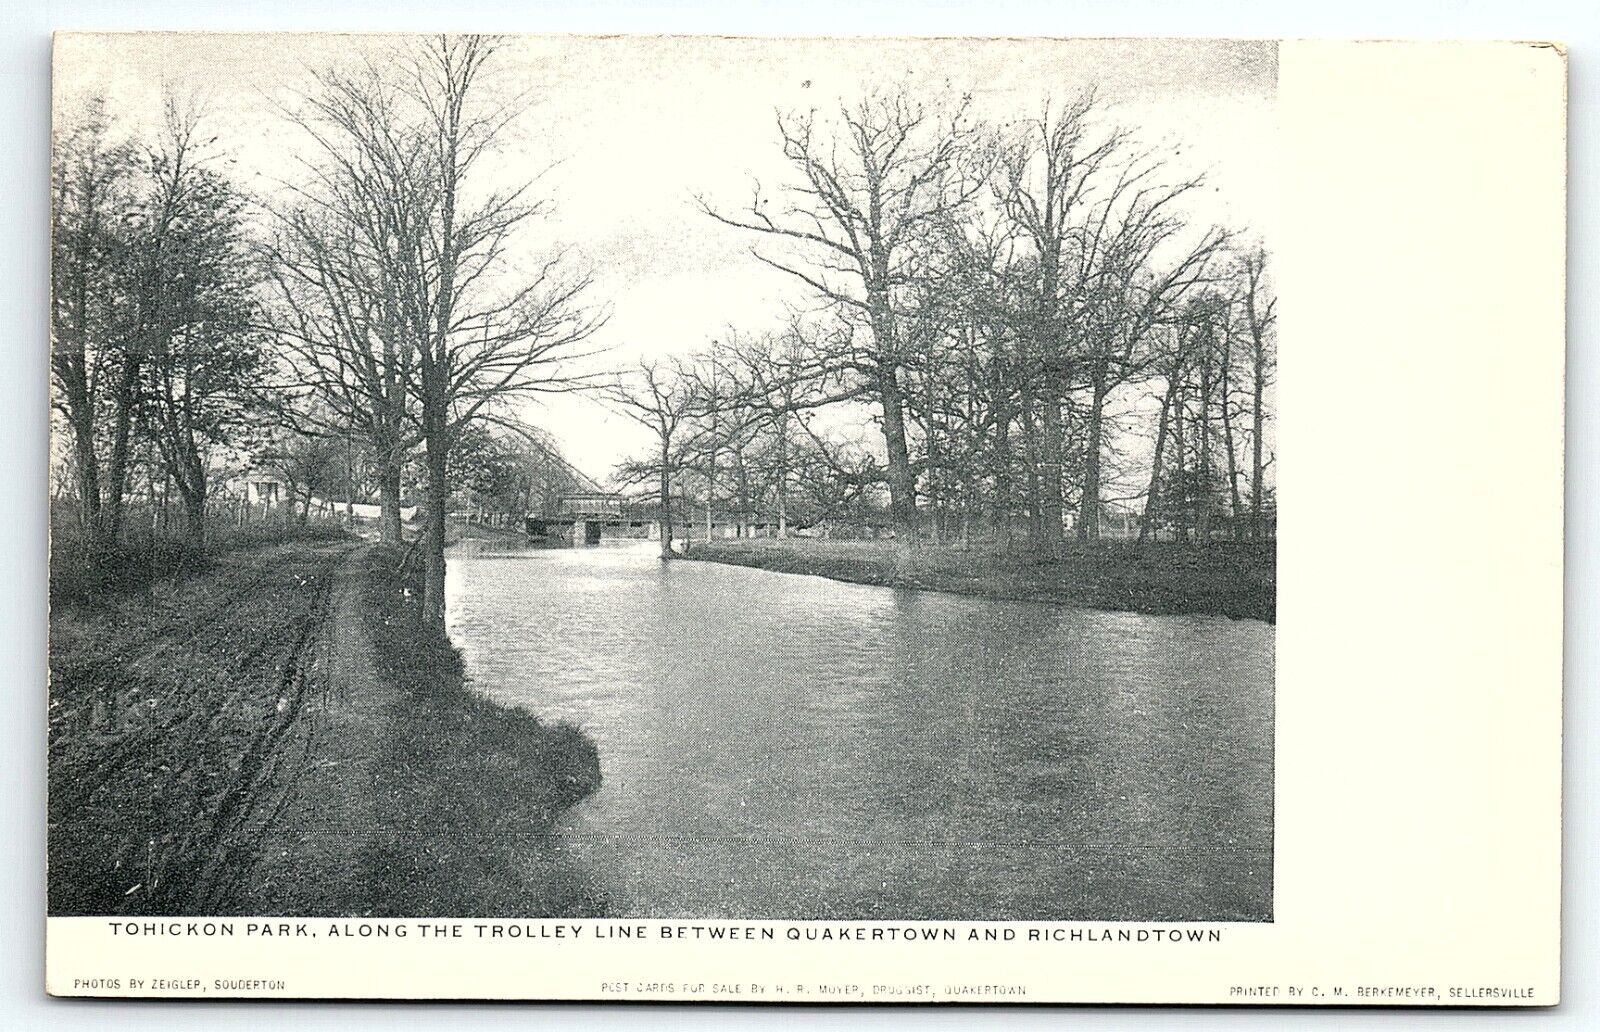 c1906 TOHICKON PARK ALONG TROLLEY LINE QUAKERTOWN AND RICHLAND PA POSTCARD P4126